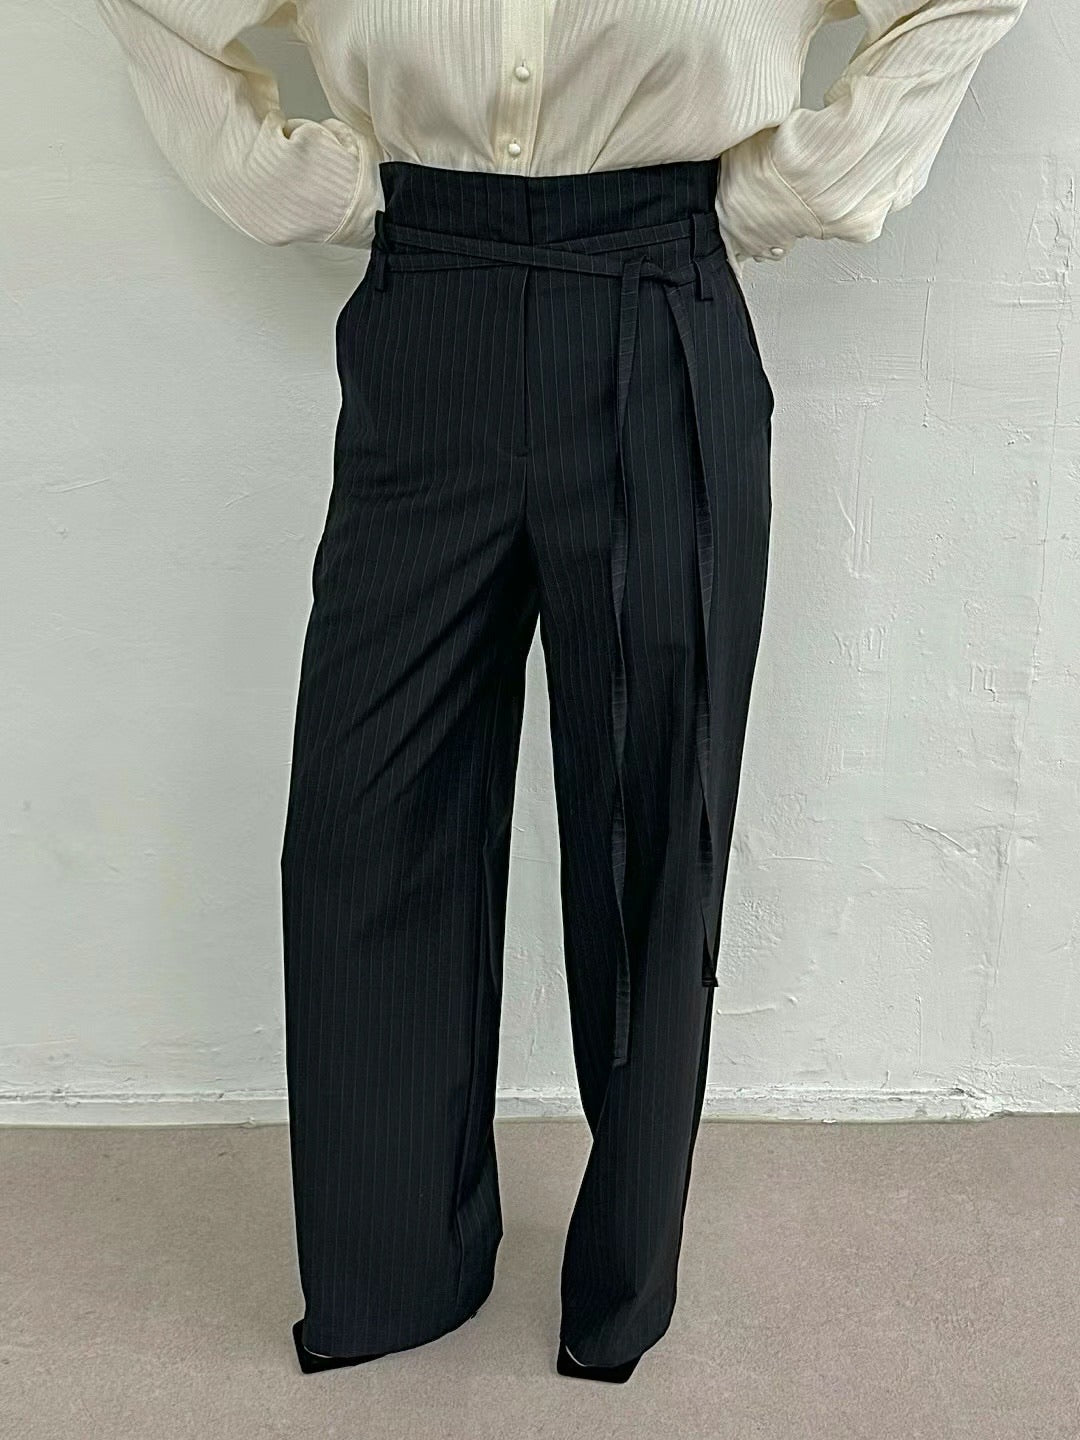 Striped strappy high waist suit pants